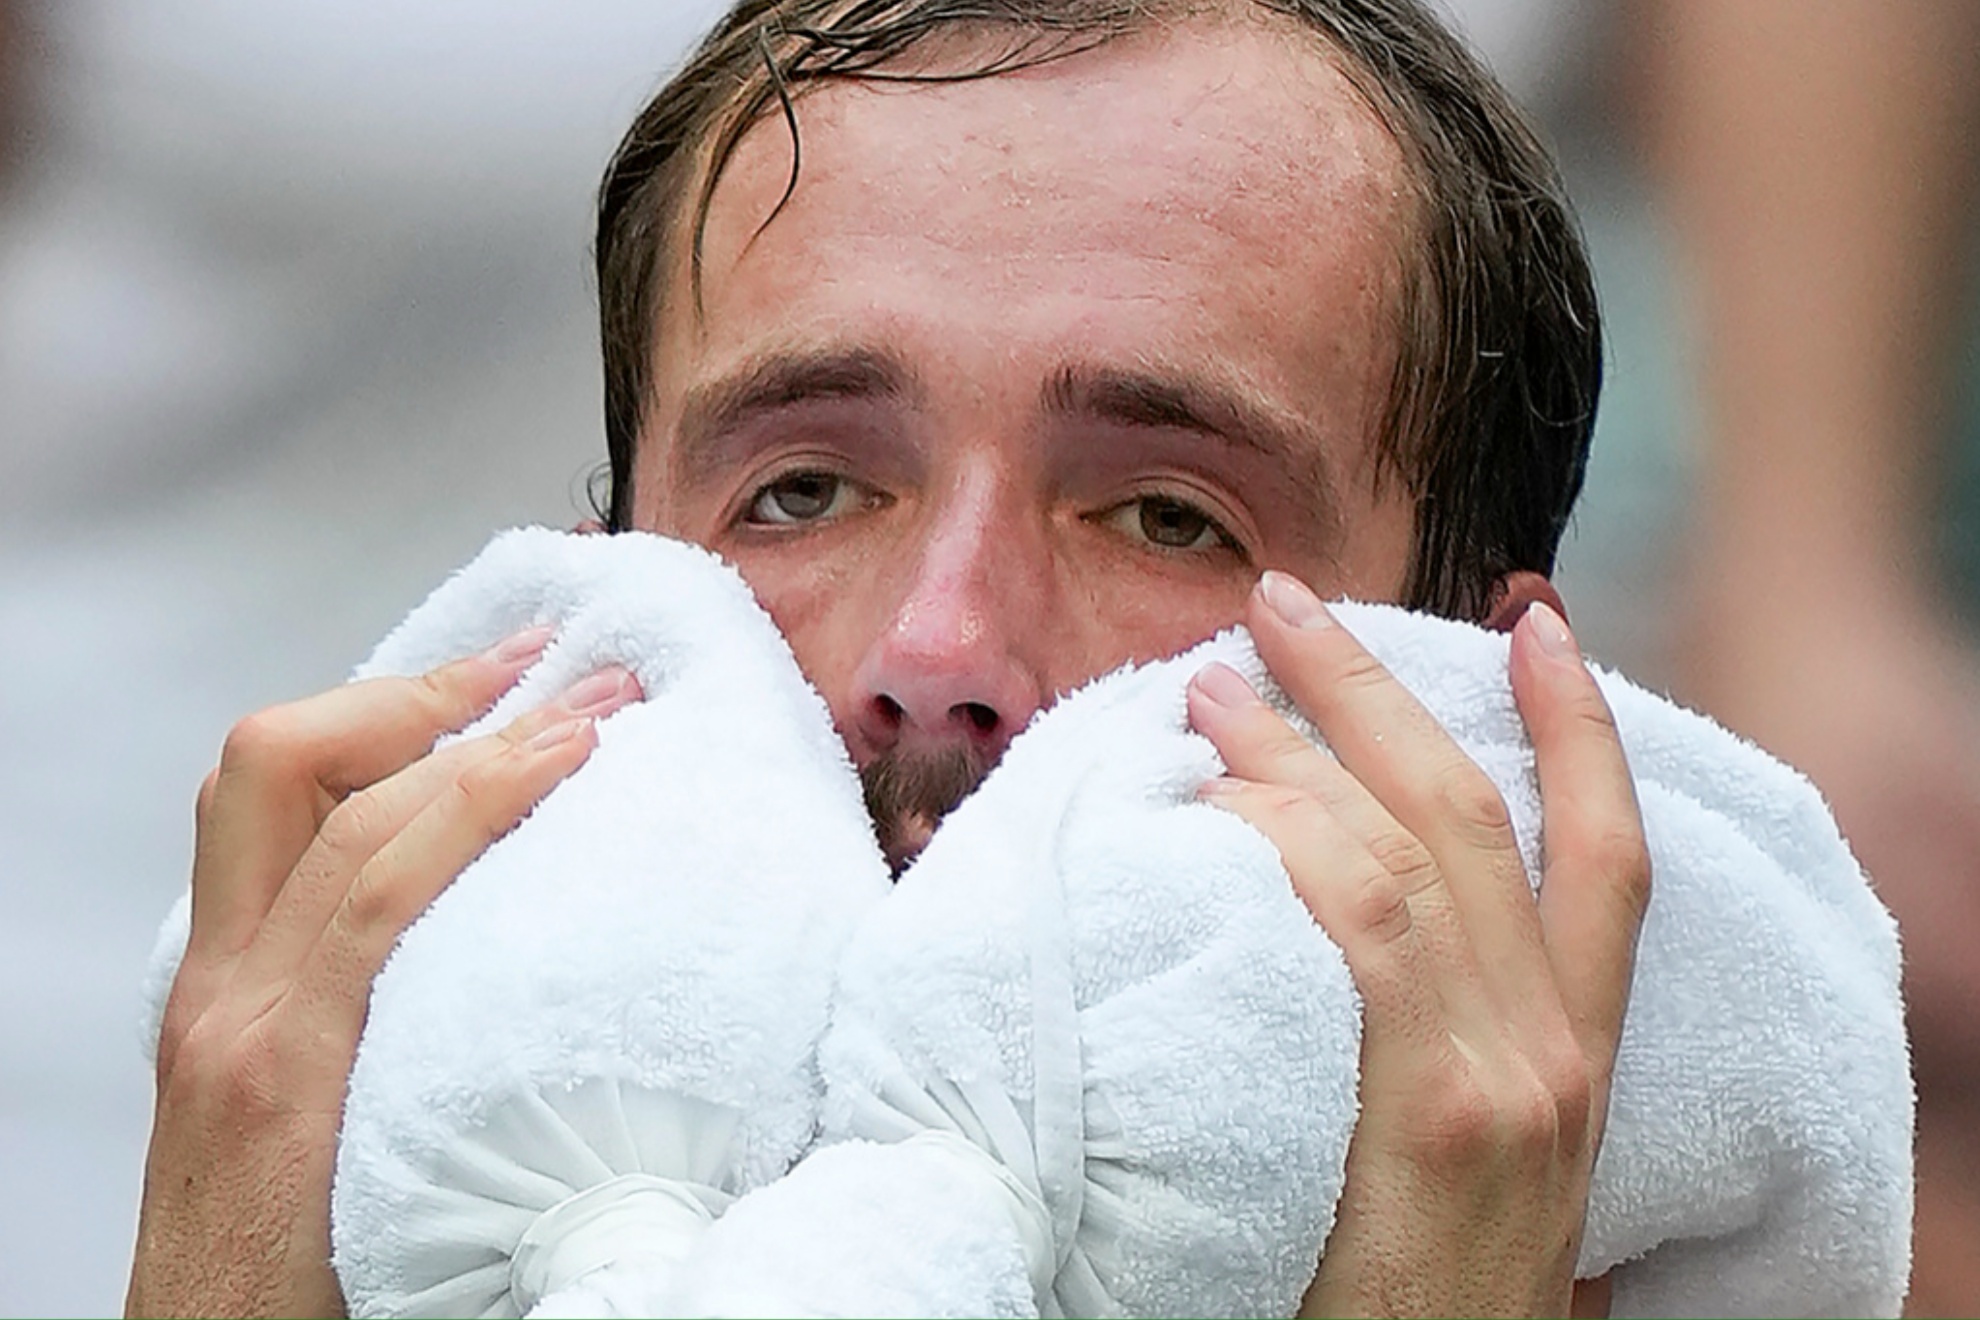 Daniil Medvedev advanced to semifinals amid struggles with New York heat wave